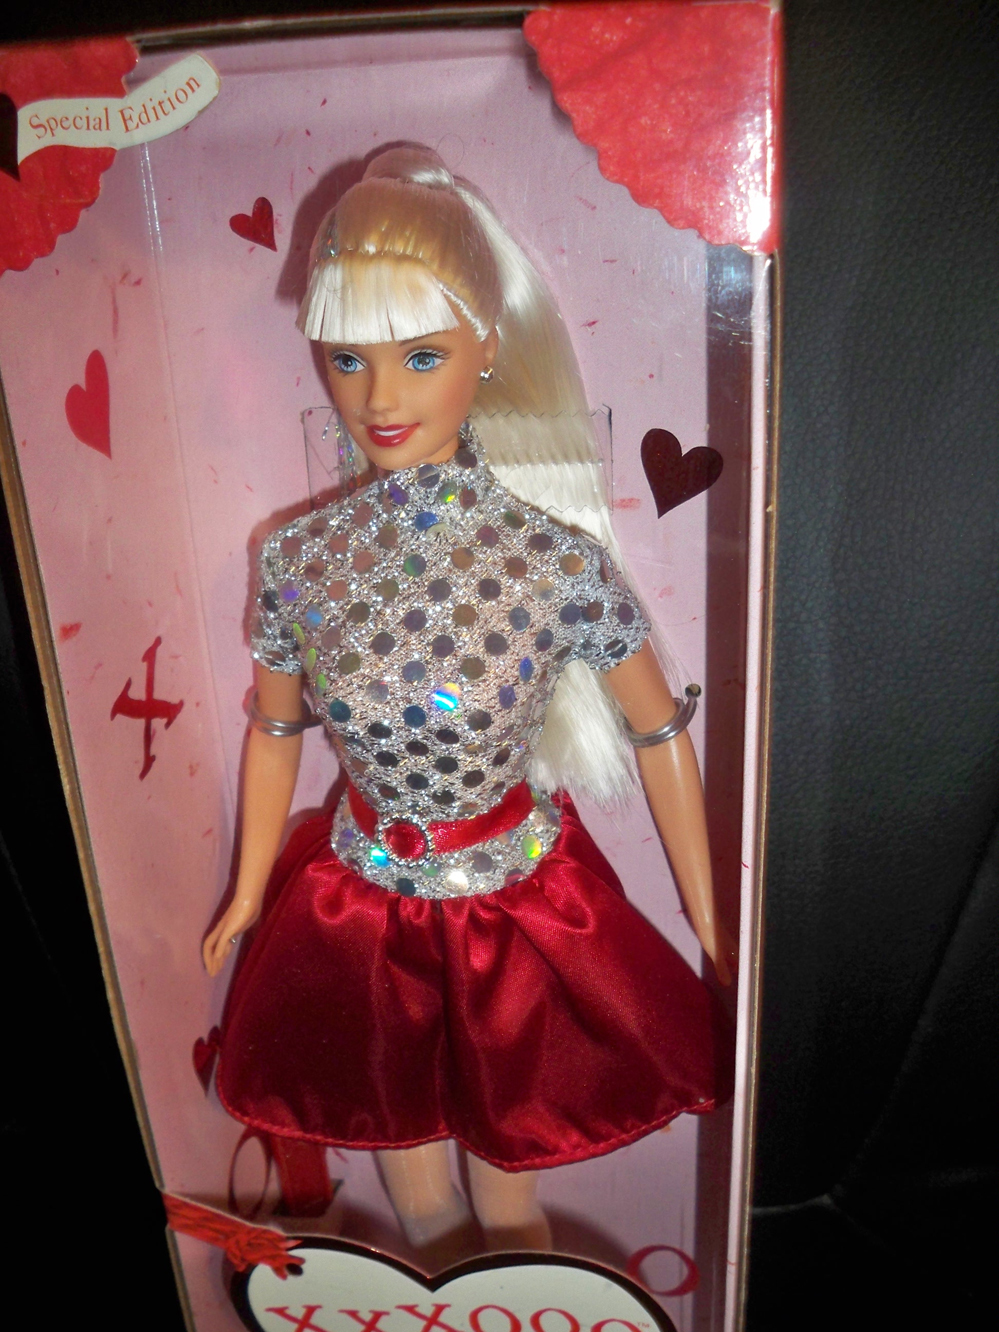 mattel special edition barbie doll